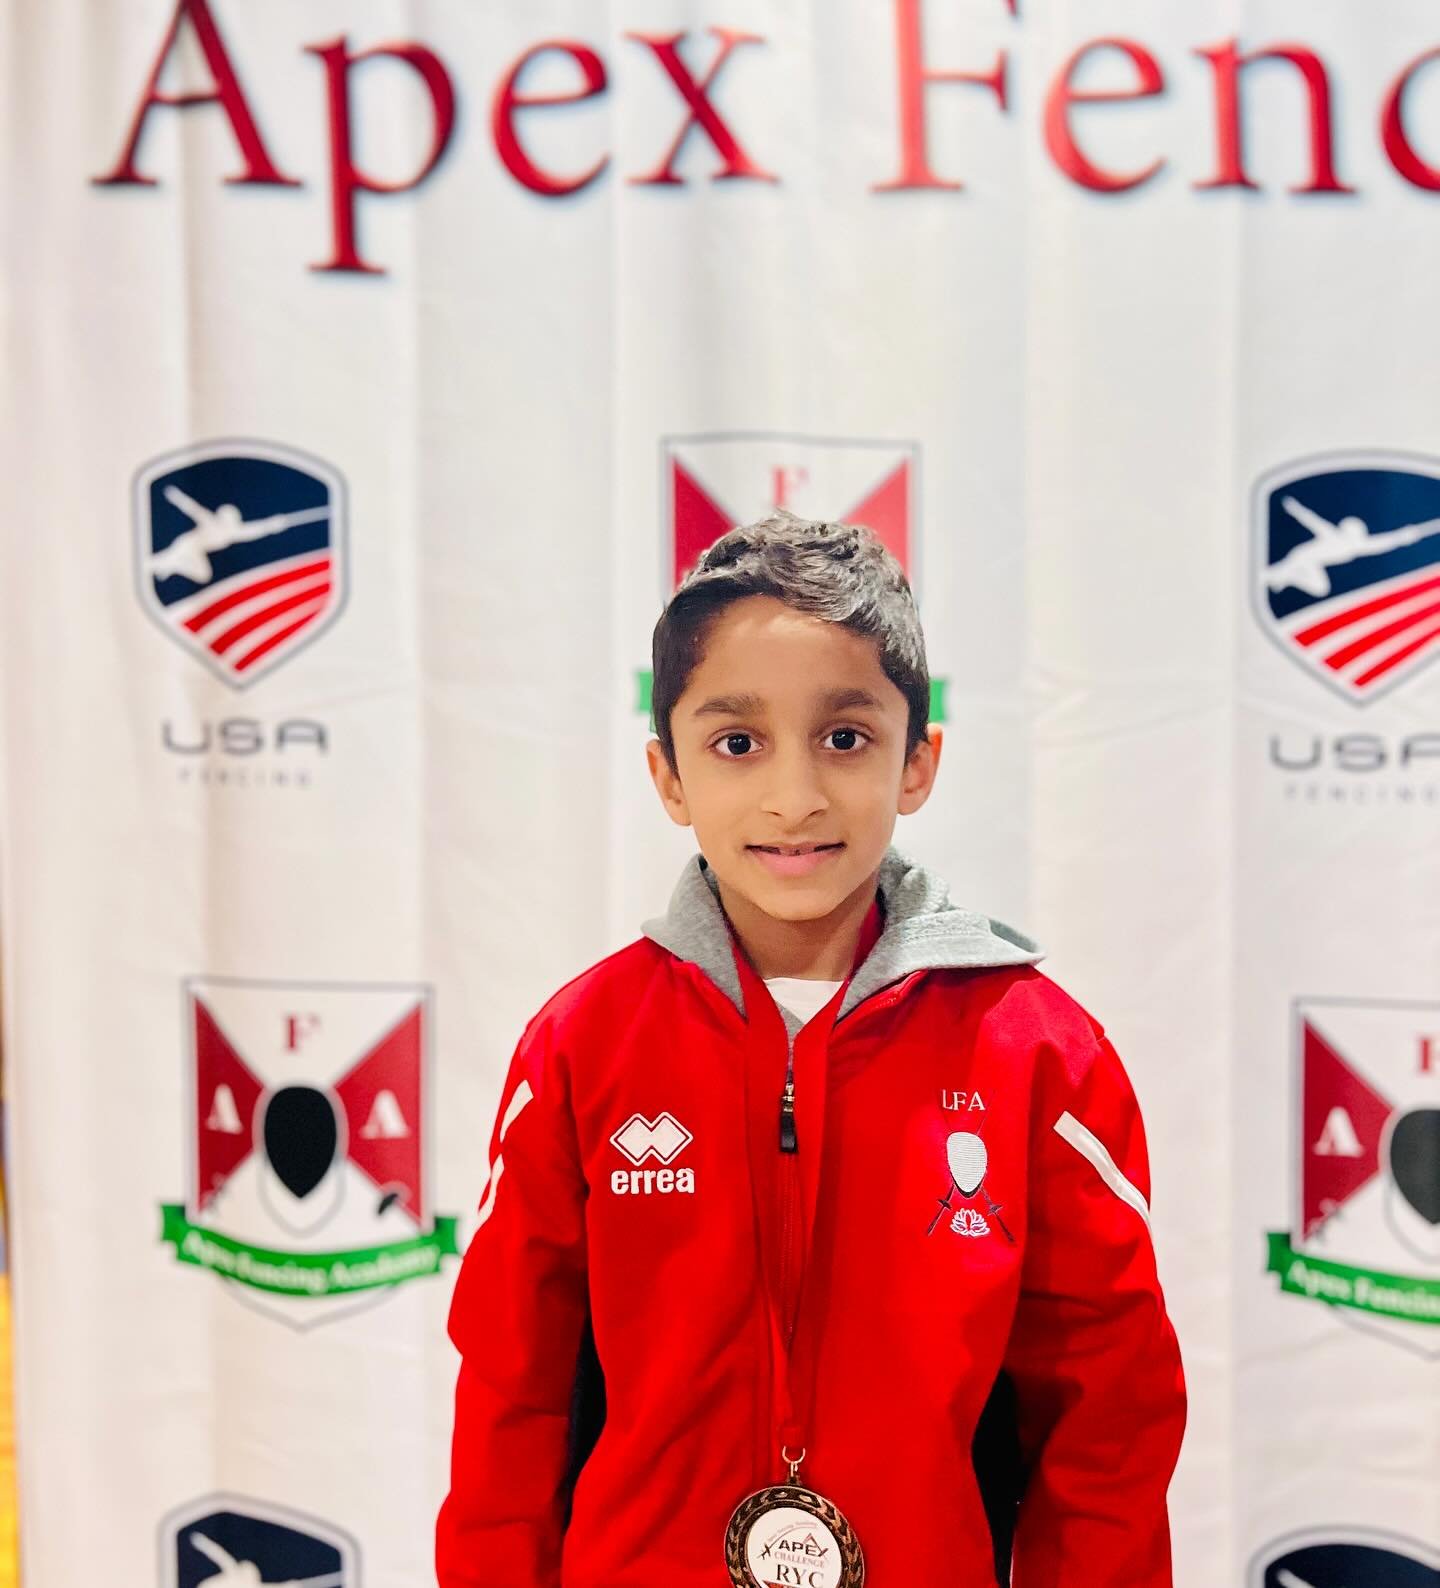 And Jai did it again! He made Top 8 in Y10 at the Apex Fencing Challenge this past weekend!! Congrats Jai on your newest medal!!👏🙌🤺🏅